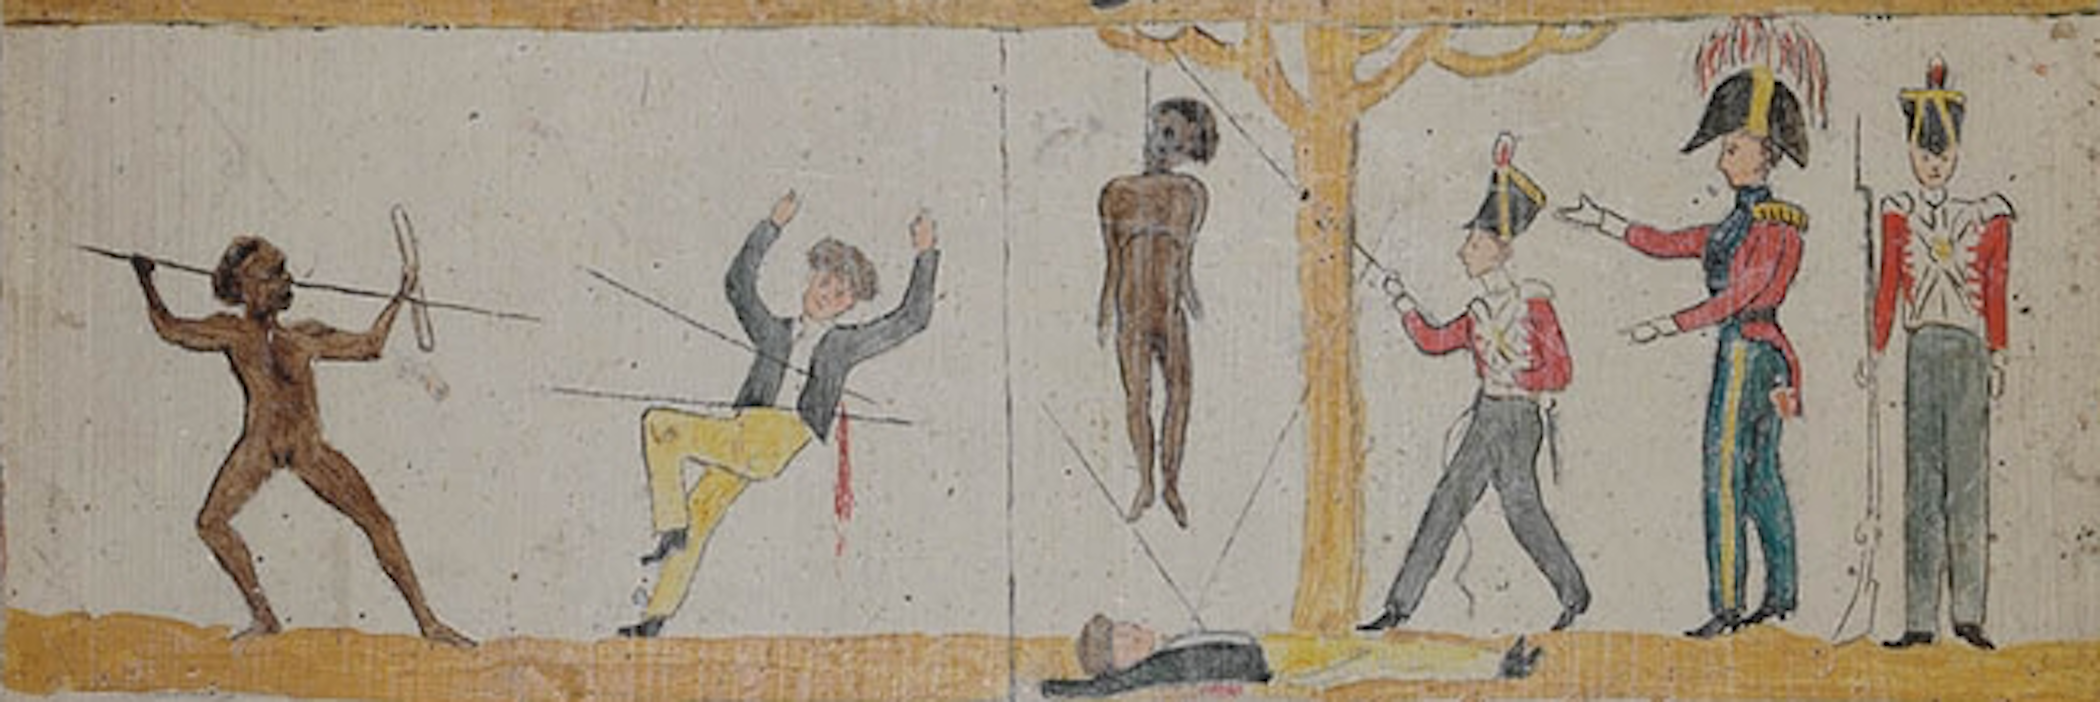 Image of the third section of Second section of Governor Arthur's Proclamation to the Aborigines